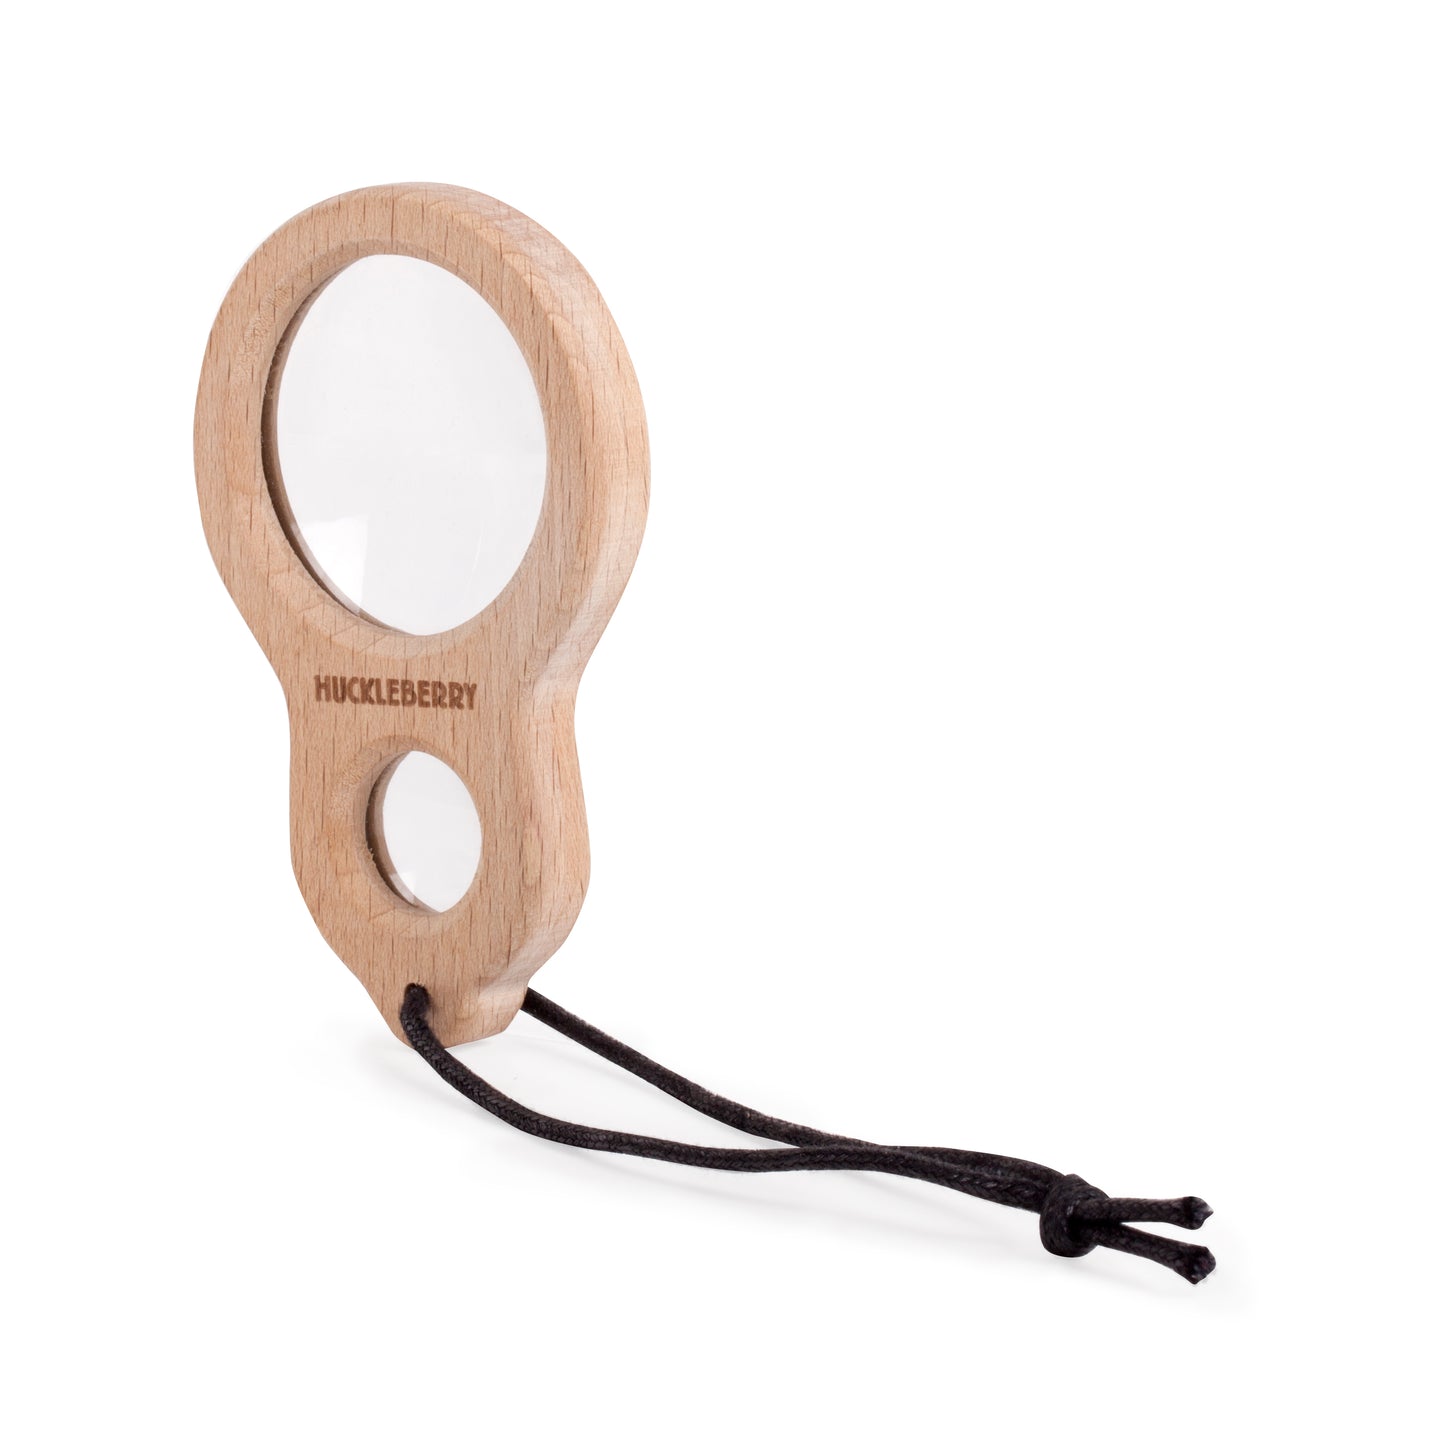 Lupe Magnifier aus Holz